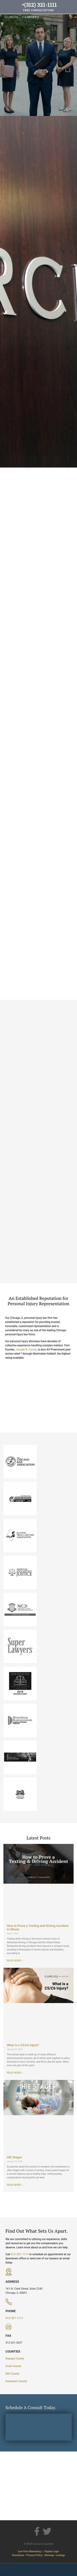 Curcio Law Offices - Chicago IL Lawyers